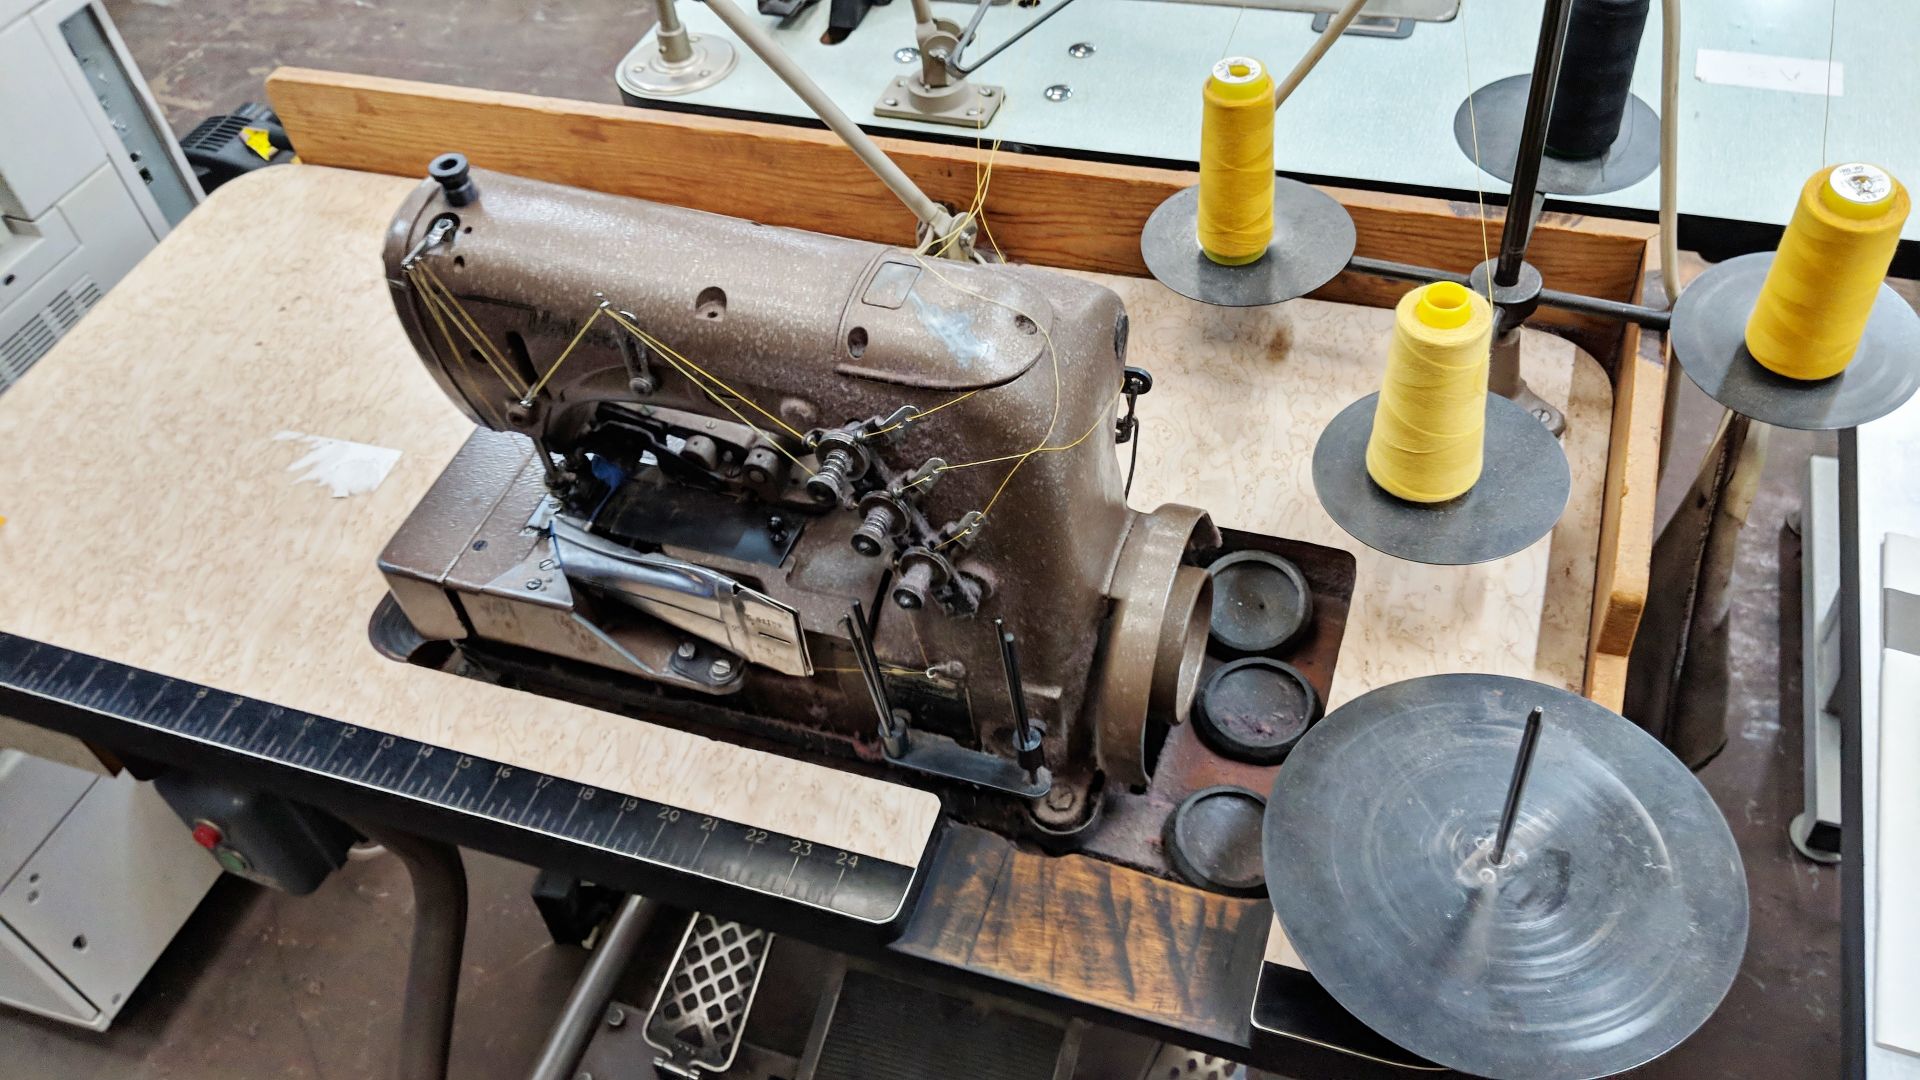 Union Special overlocker sewing machine on bench with tape feed attachments, including foot & hand - Image 7 of 8